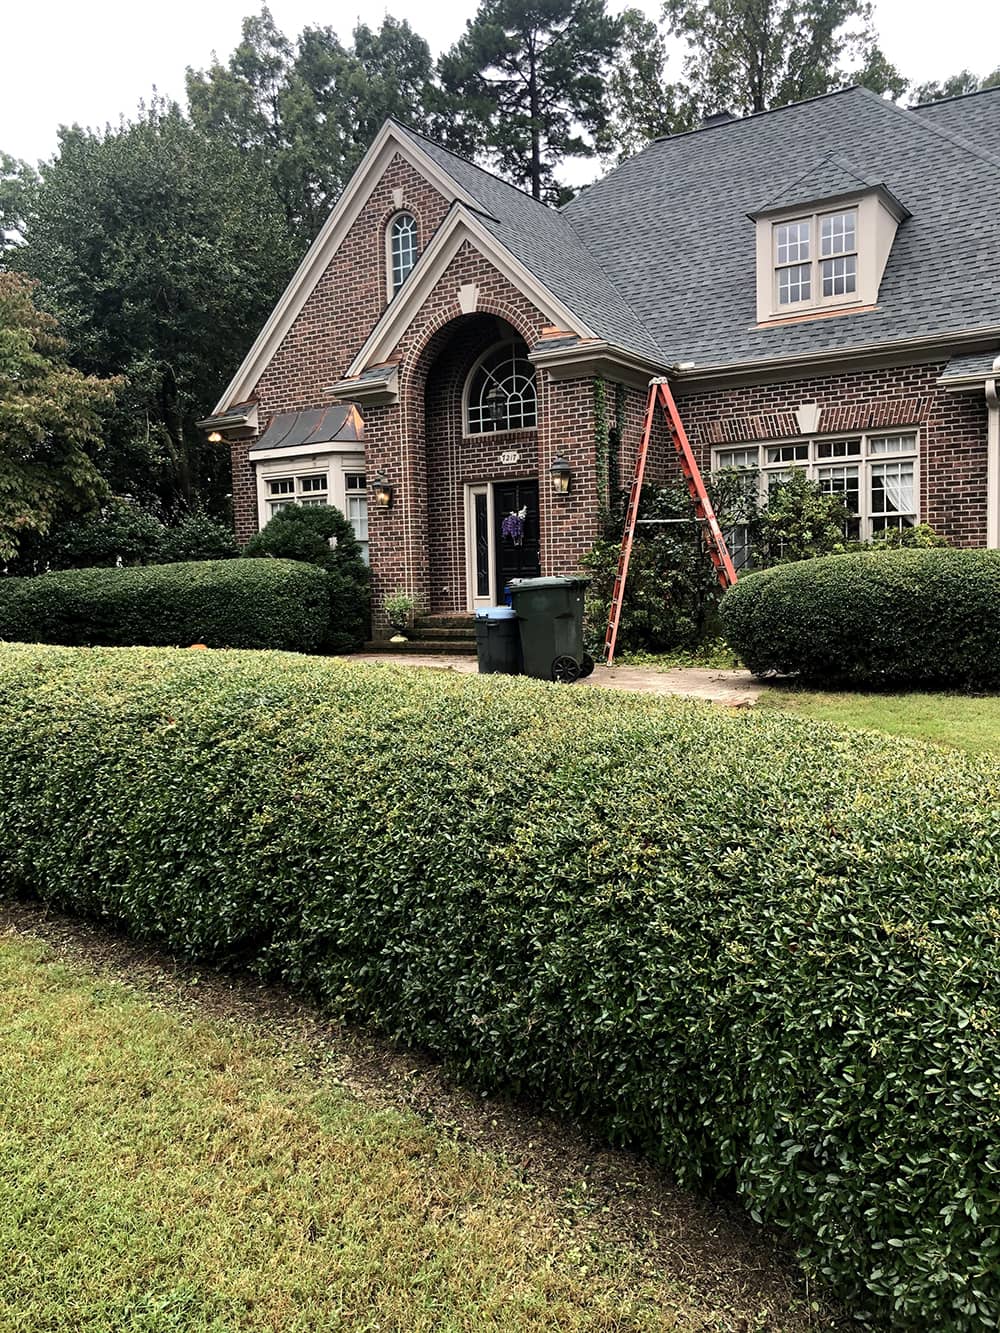 brick home with red ladder and mulch around bushes